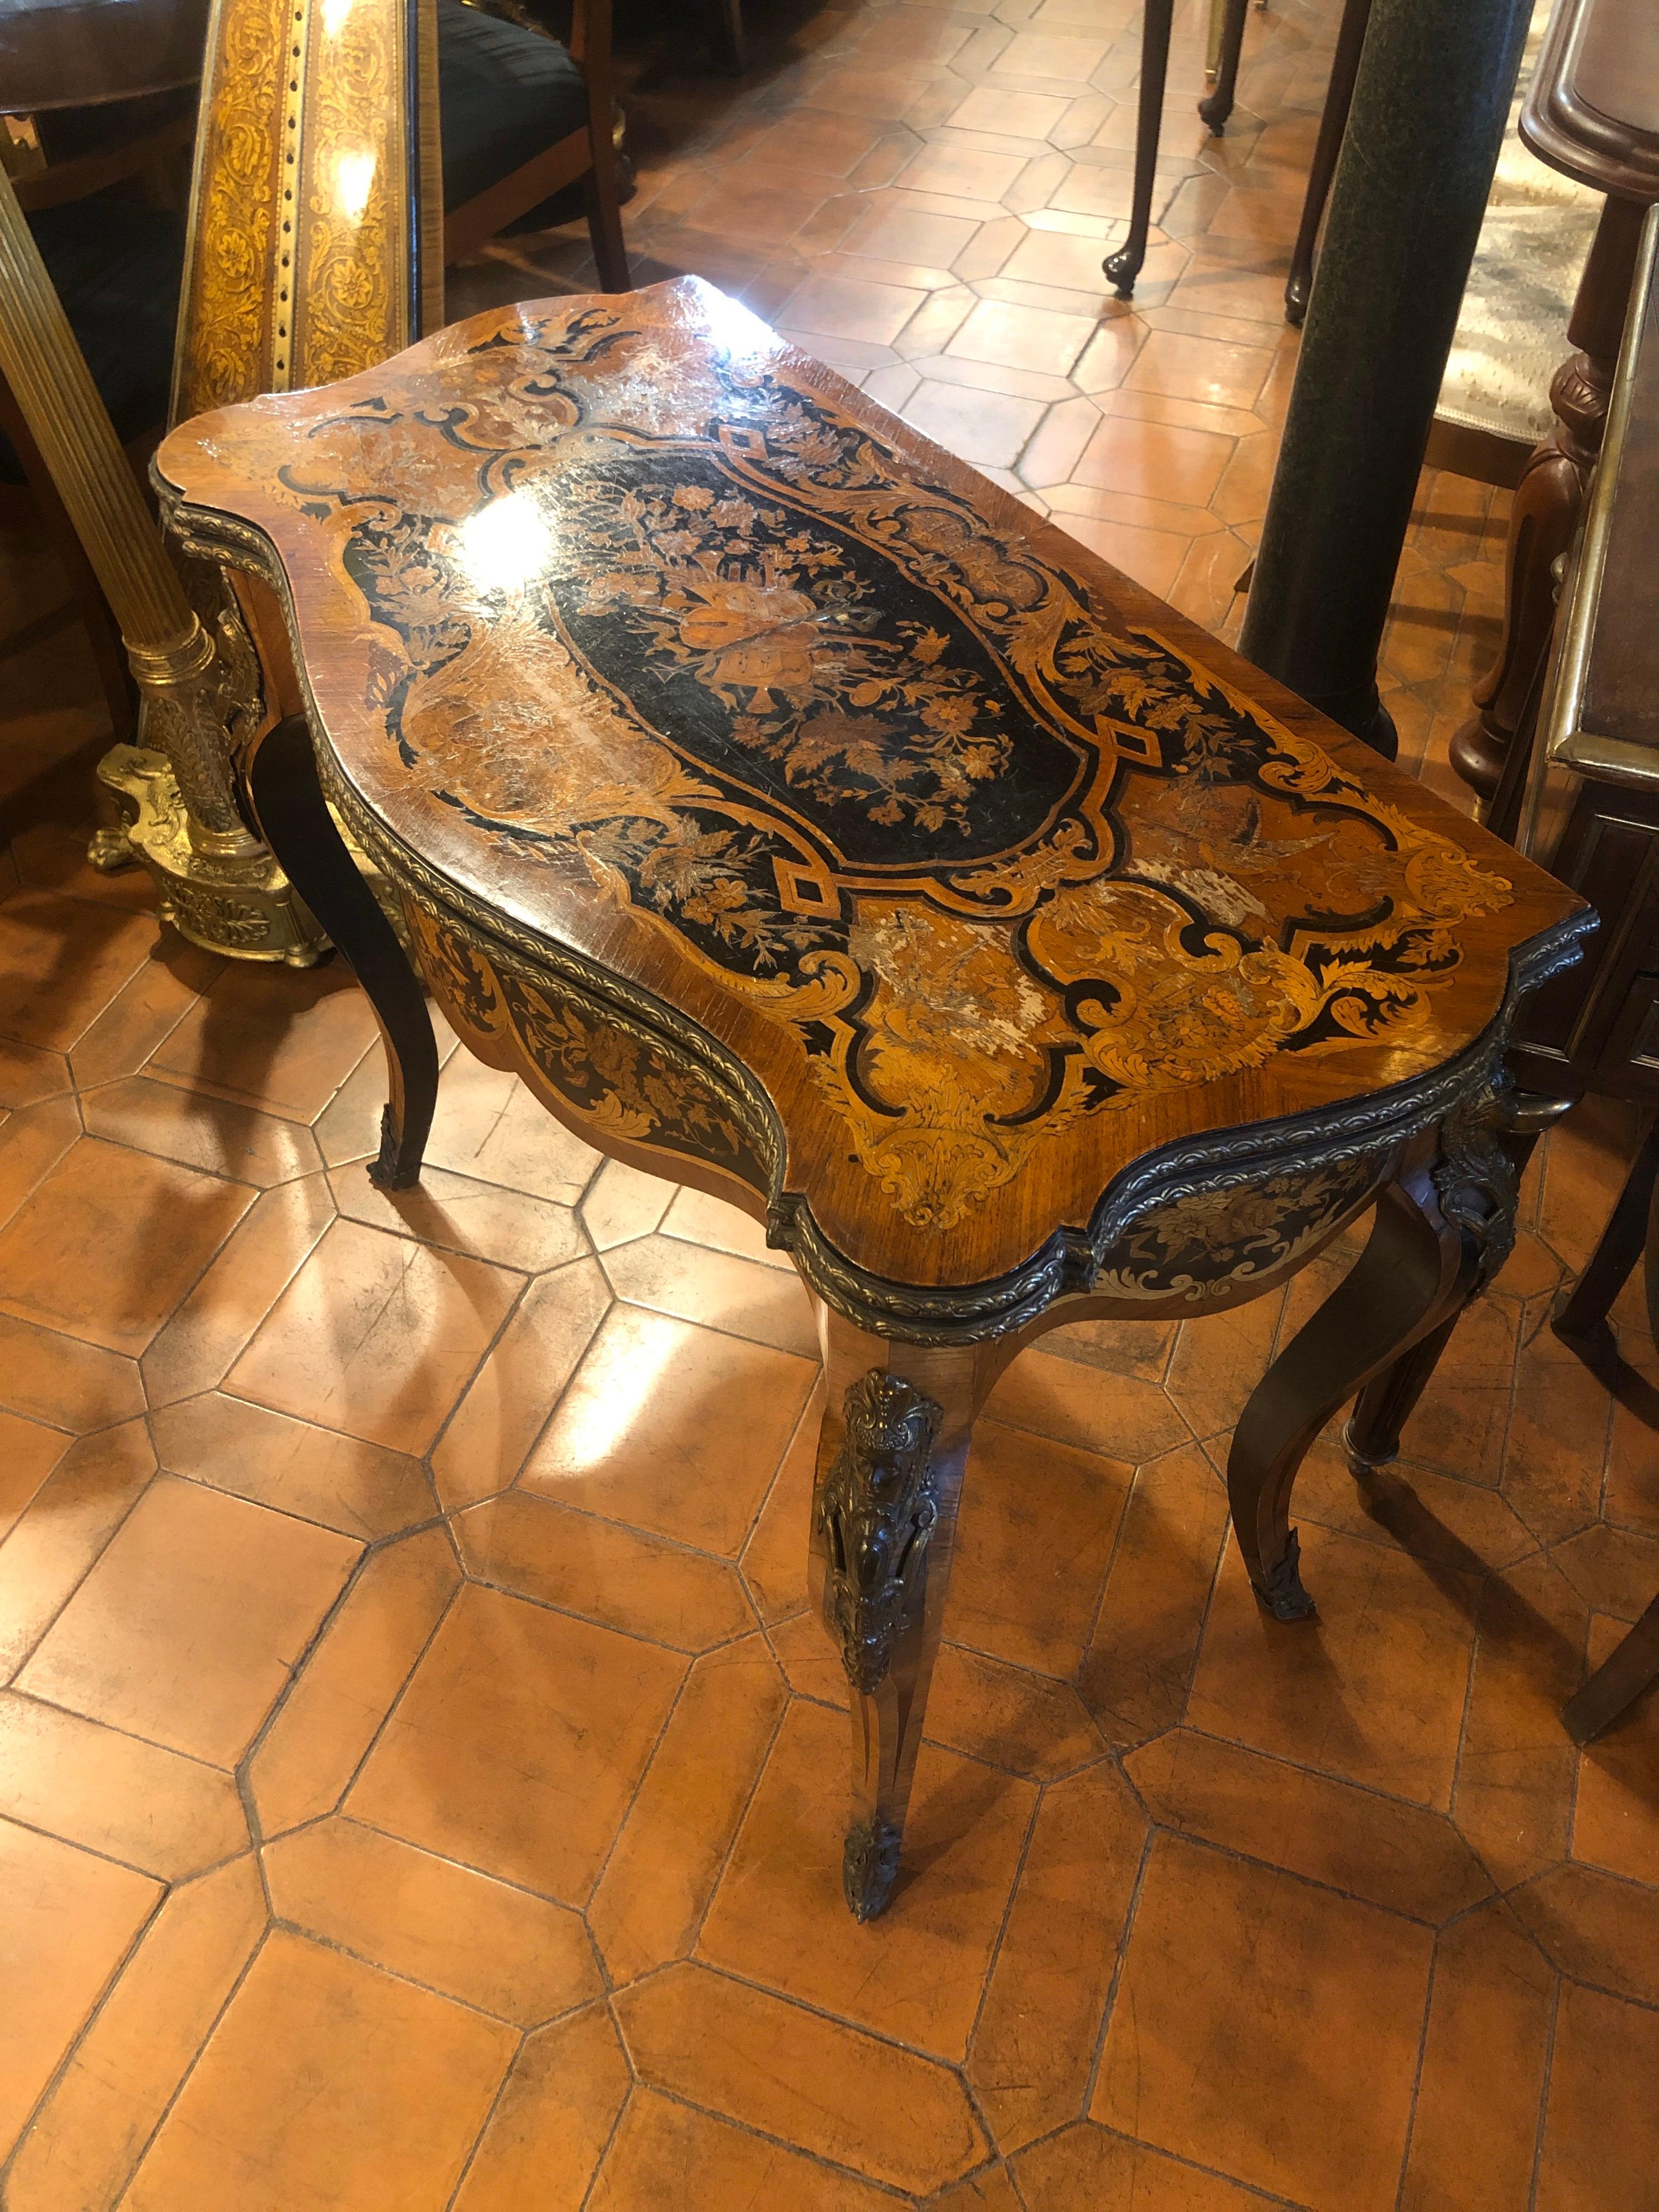 French game table, Louis XVI style, Napoleon III period, circa 1860. With wonderful inlaid decorations, fantastic bronze applications on the cabriolet legs and on the edge of the top. Inlaid also inside. In excellent state of conservation.